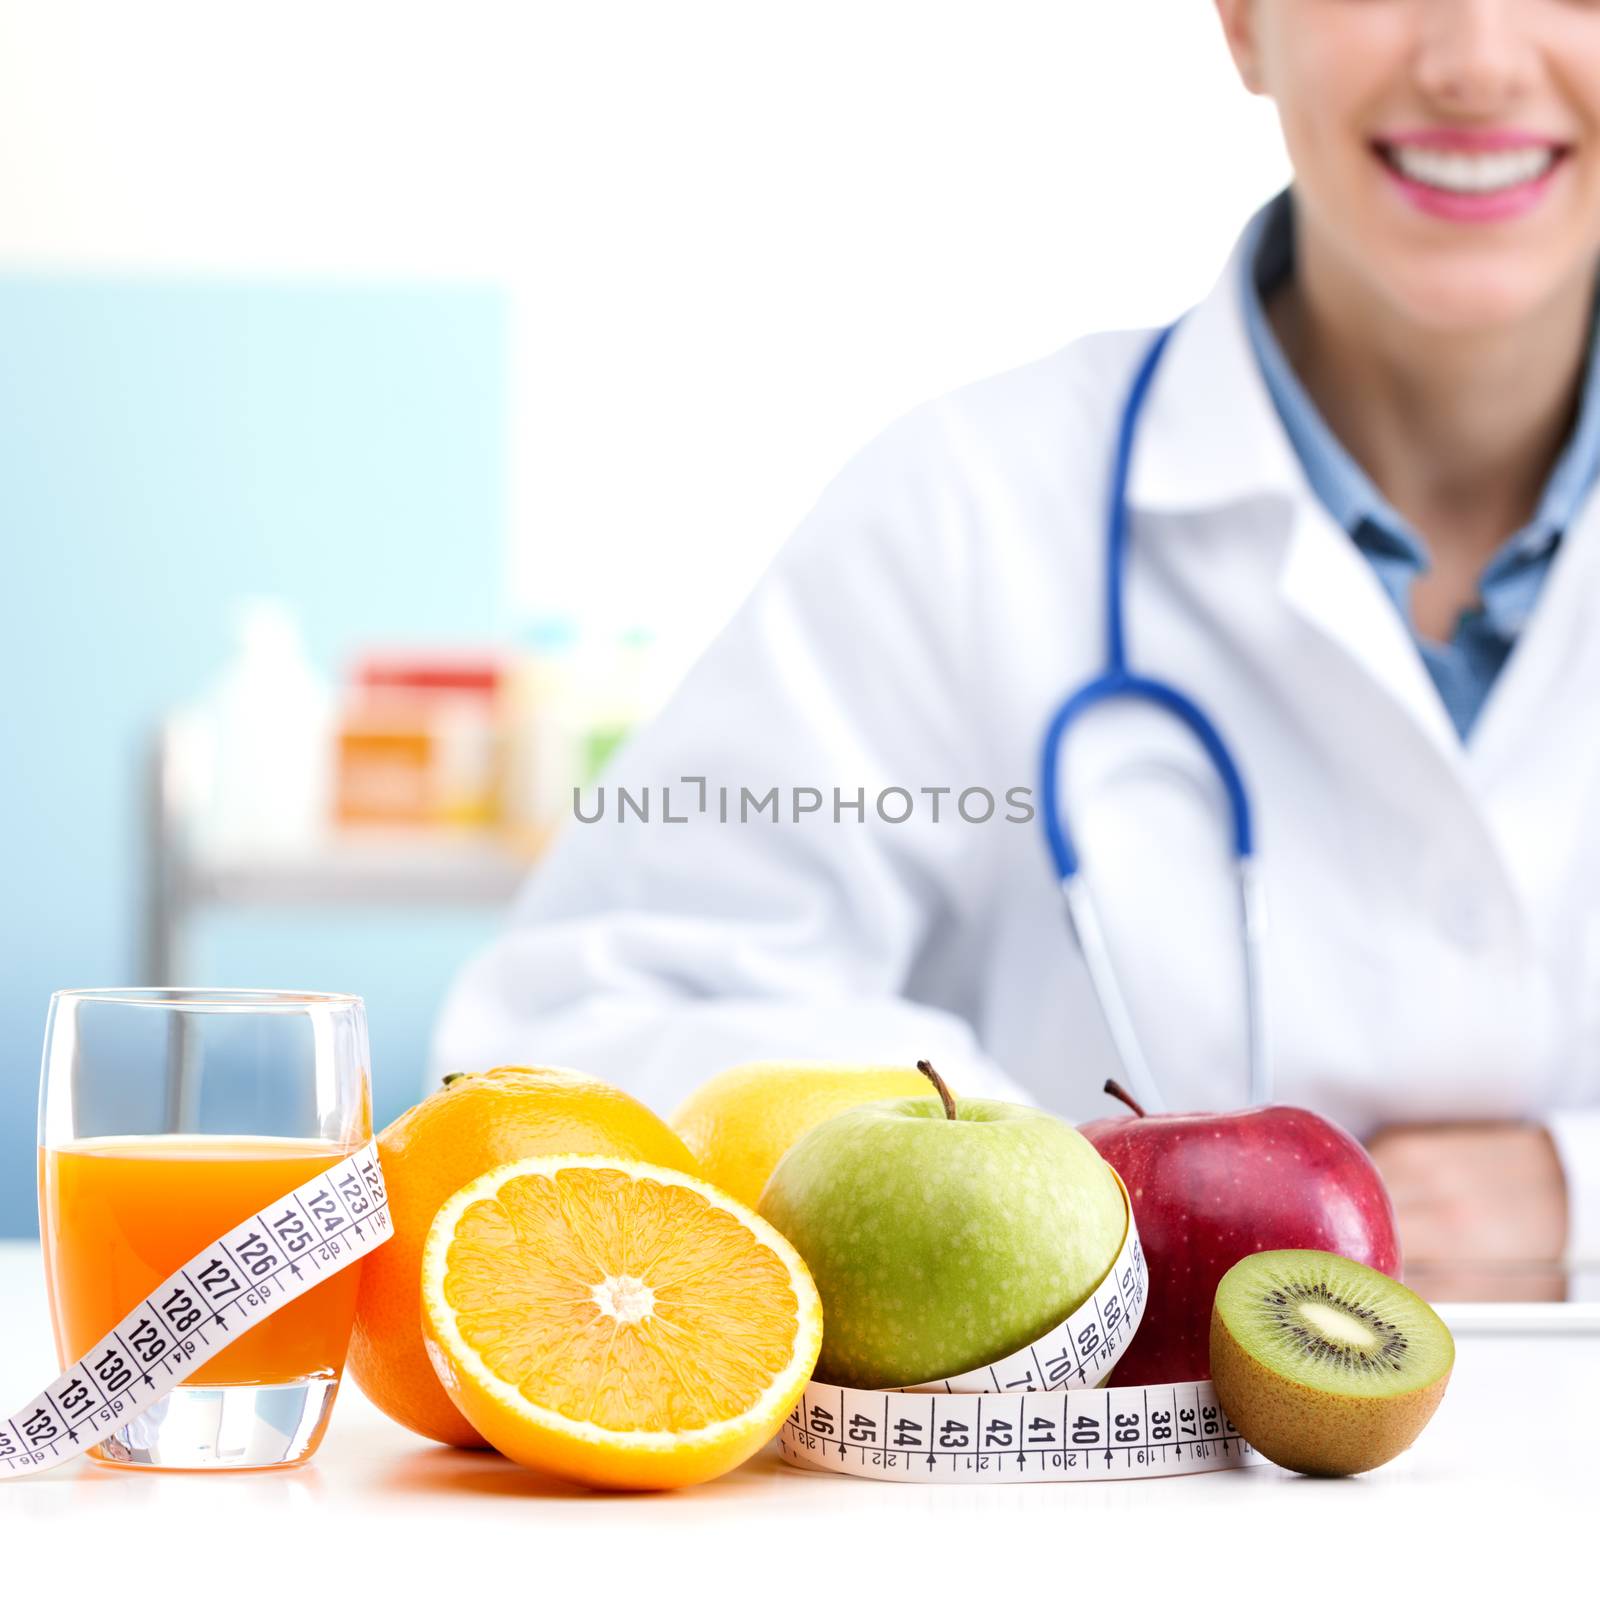 Nutritionist Doctor  by stokkete